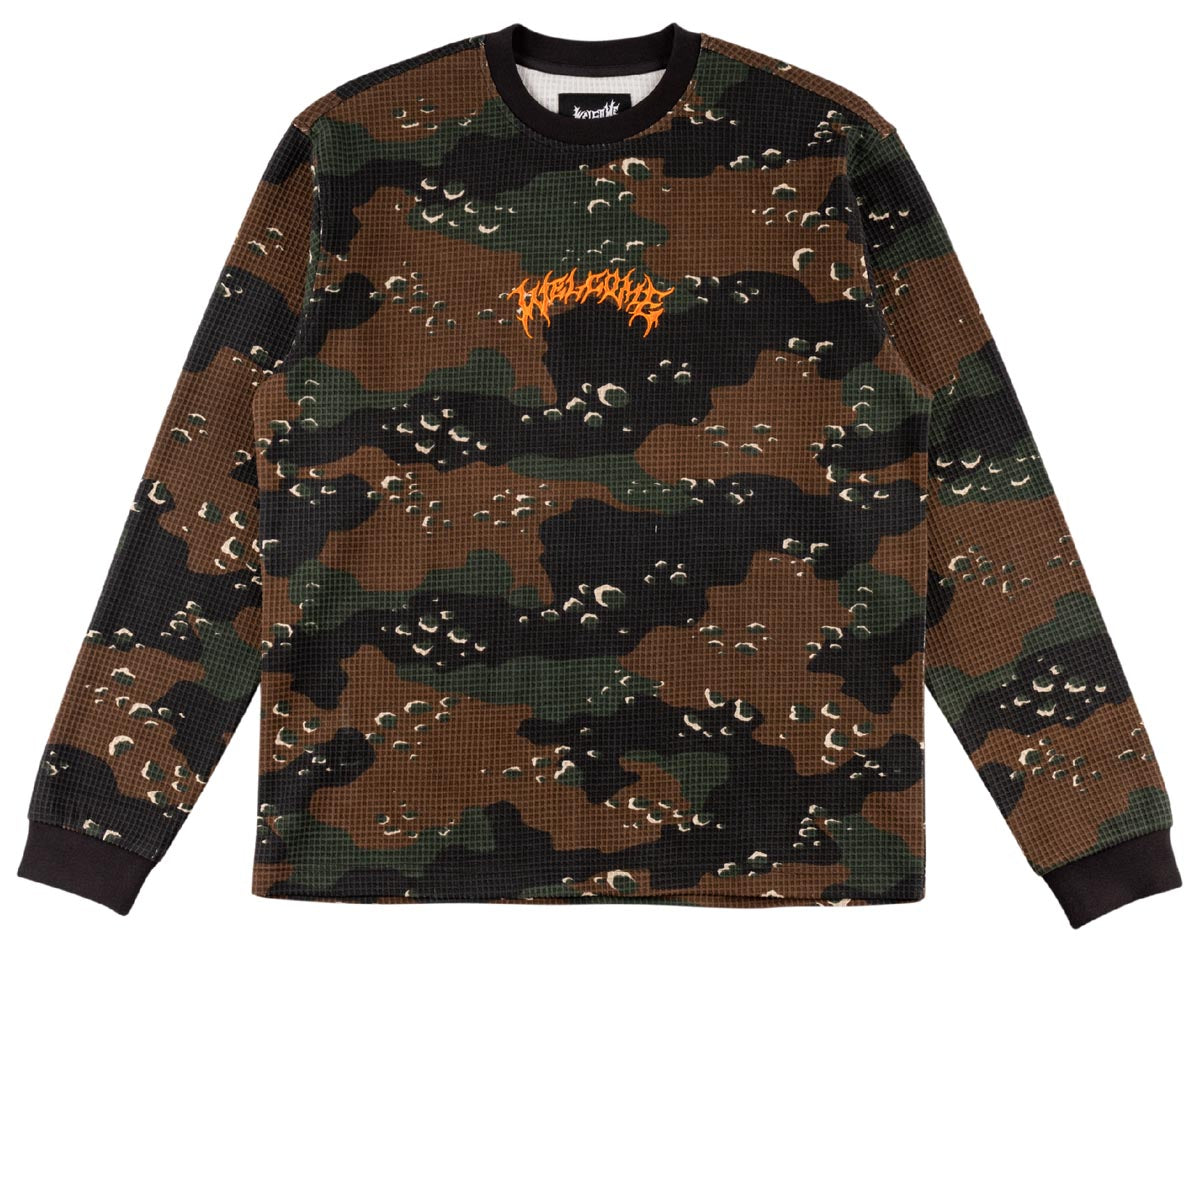 Welcome Covert Camo Thermal Shirt - Timber image 2